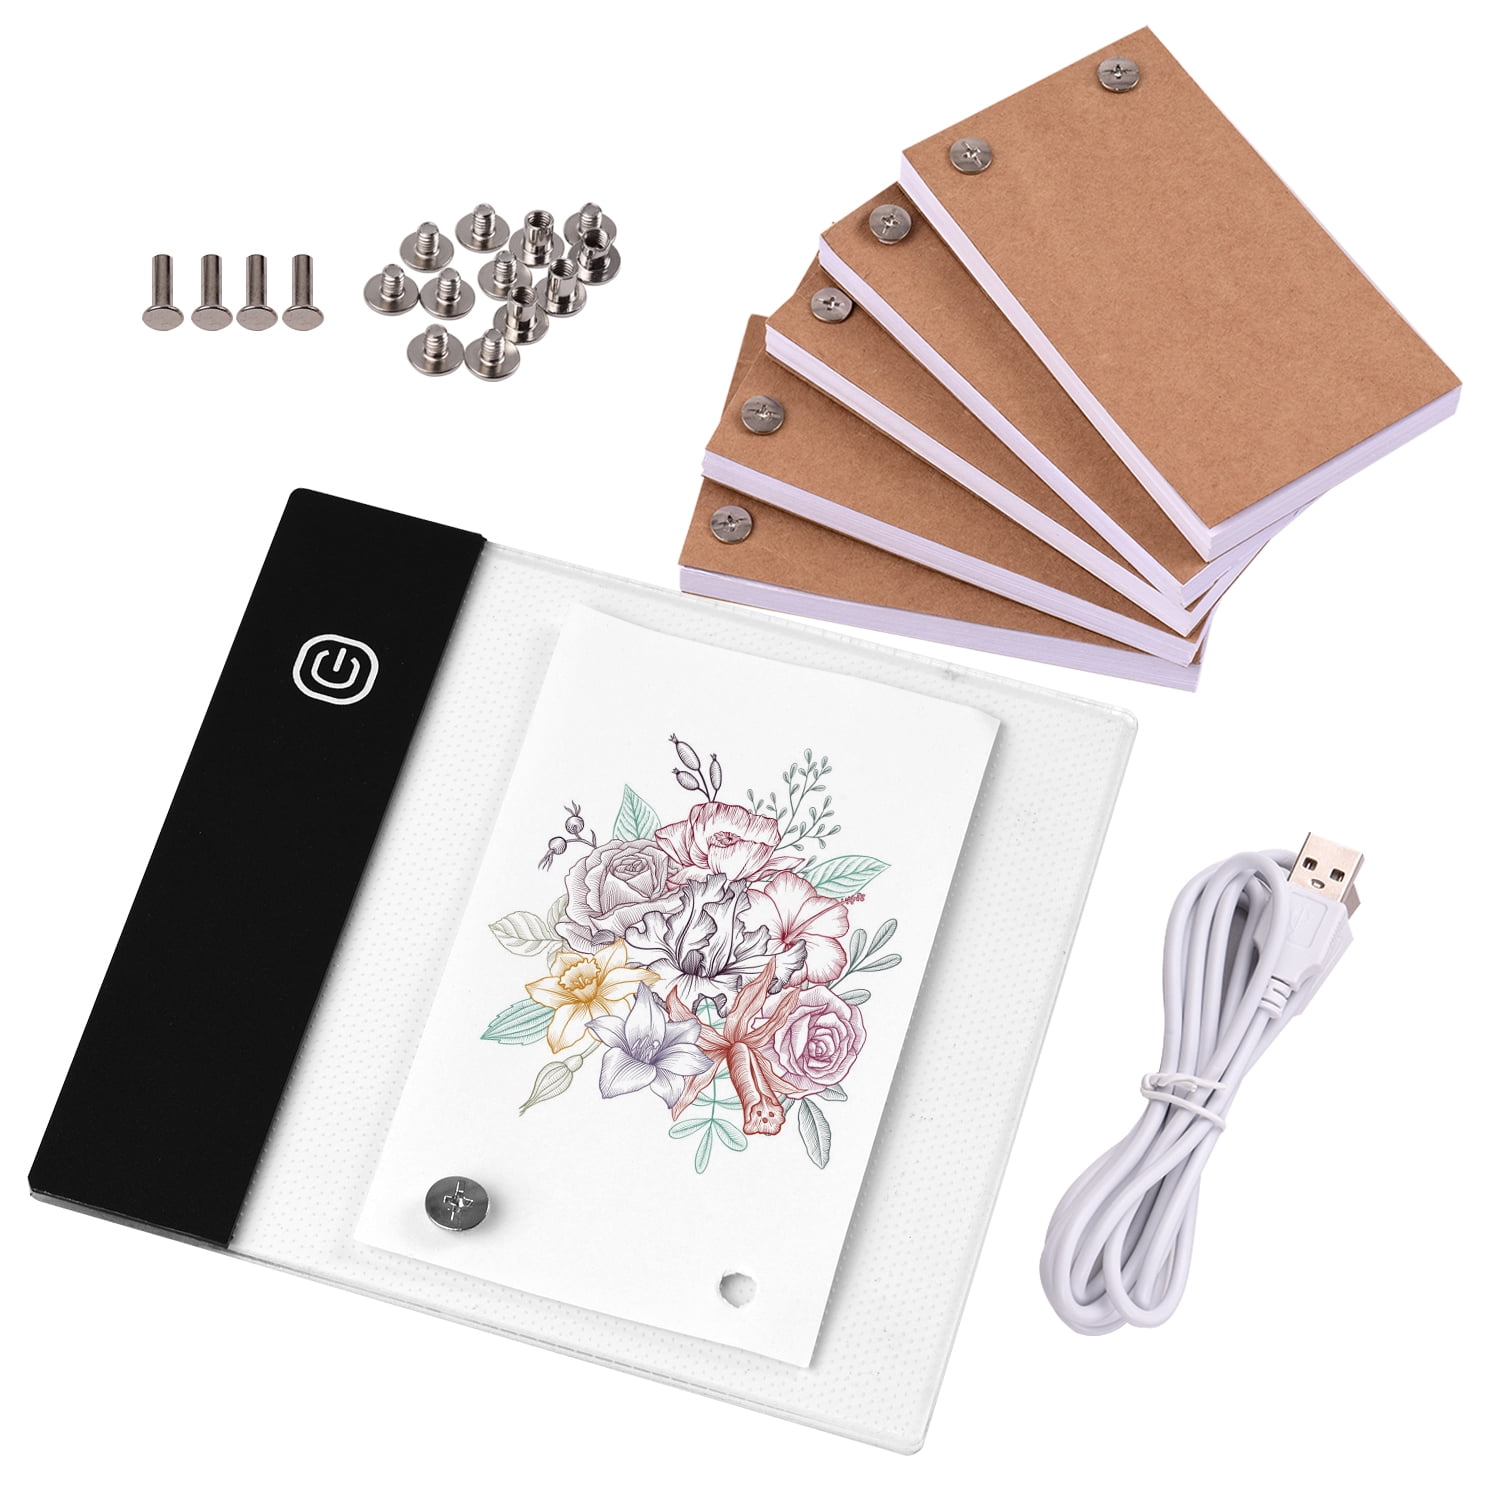 A4 Multifunctional Portable USB Powered Light Pad Copy Board with Drawing Gloves,Detachable Stand,Cable and 4 Clips,for DIY 5D Diamond Painting Sketching,Animation Drawing with Scale Designing 